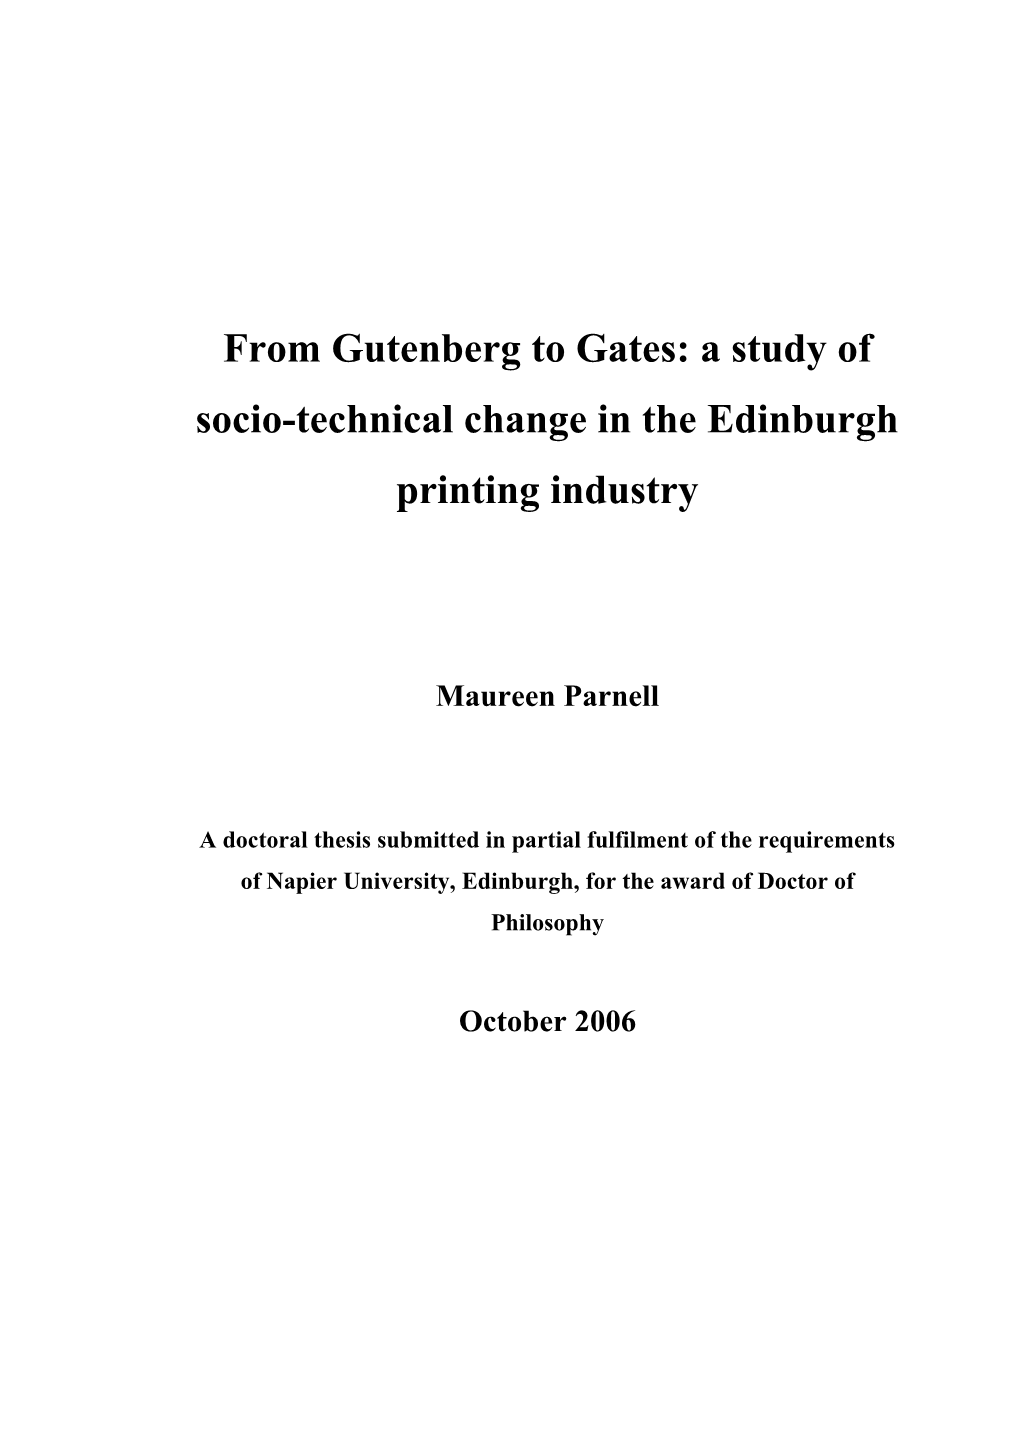 From Gutenberg to Gates: a Study of Socio-Technical Change in the Edinburgh Printing Industry